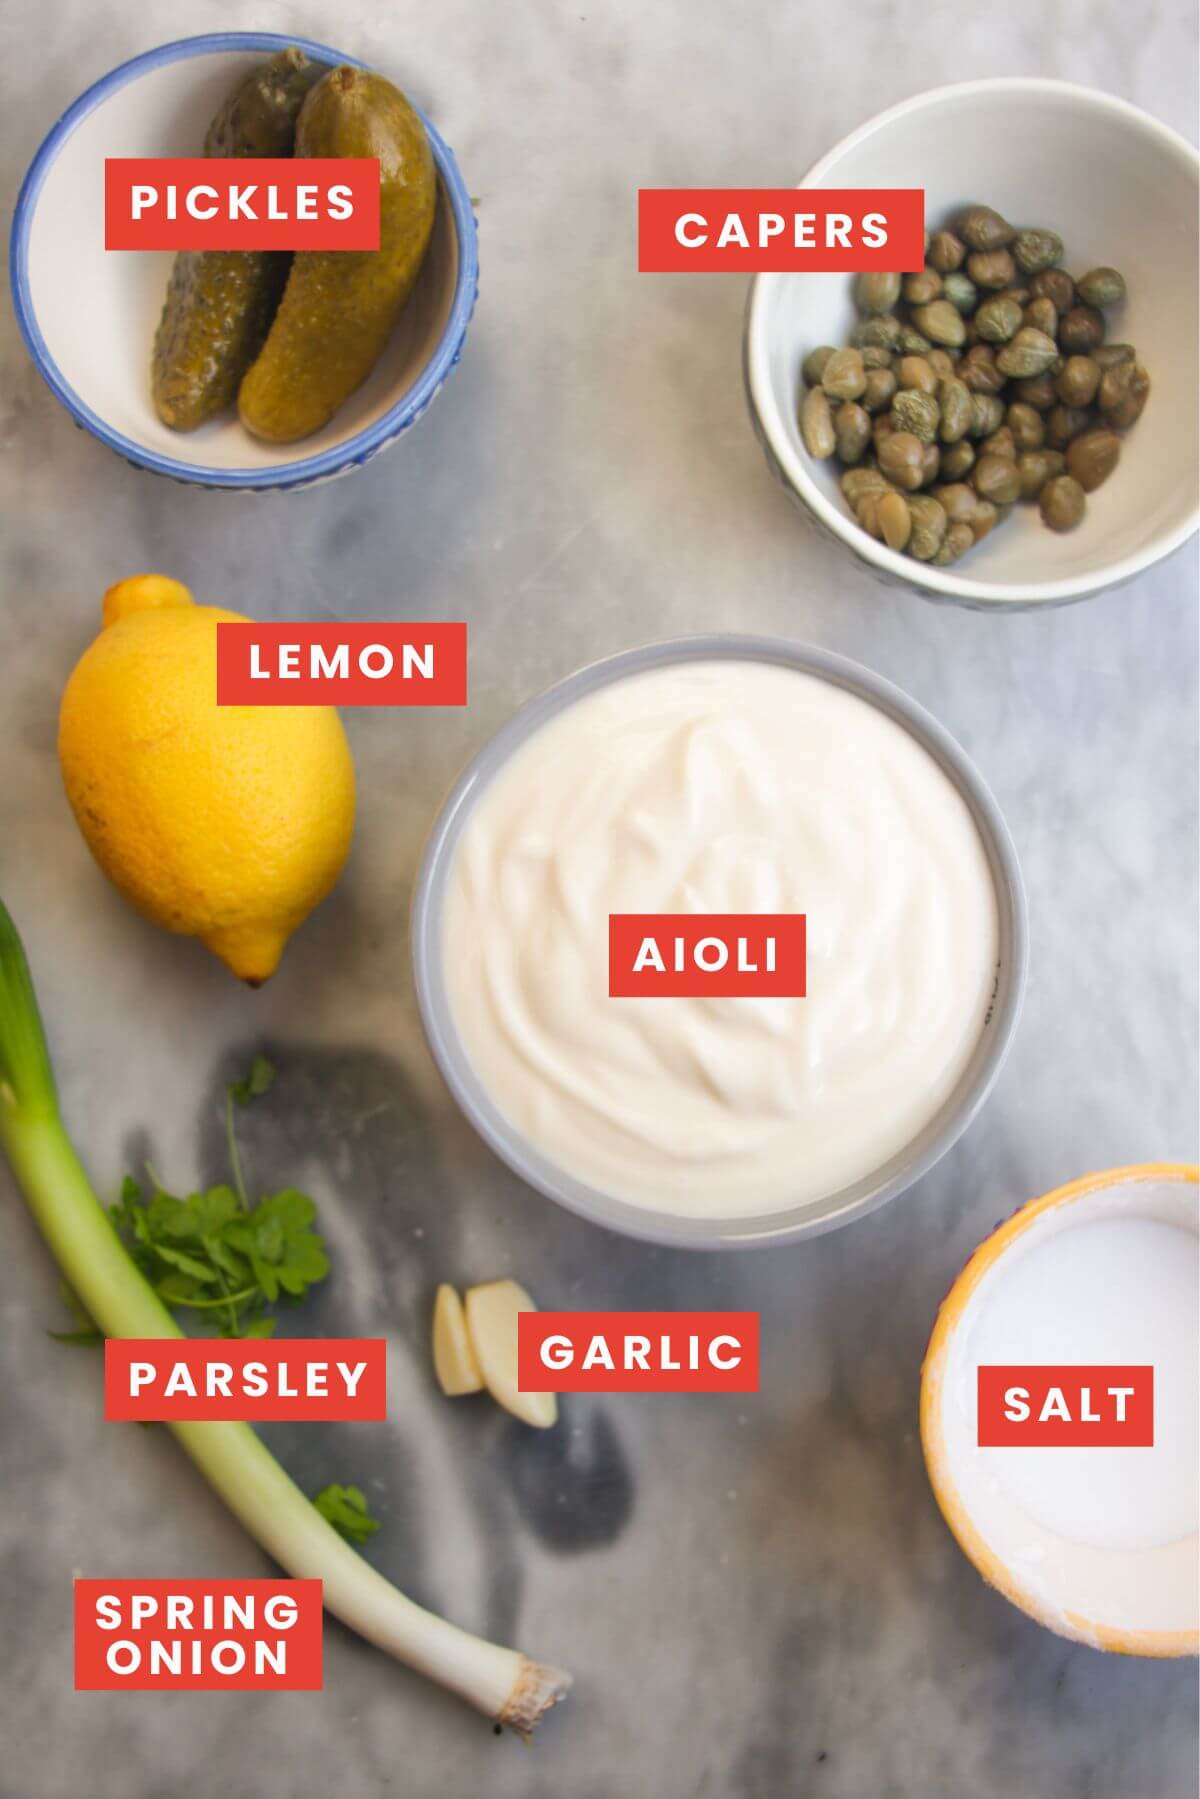 Tartare sauce ingredients laid out on a grey marble background and labelled.